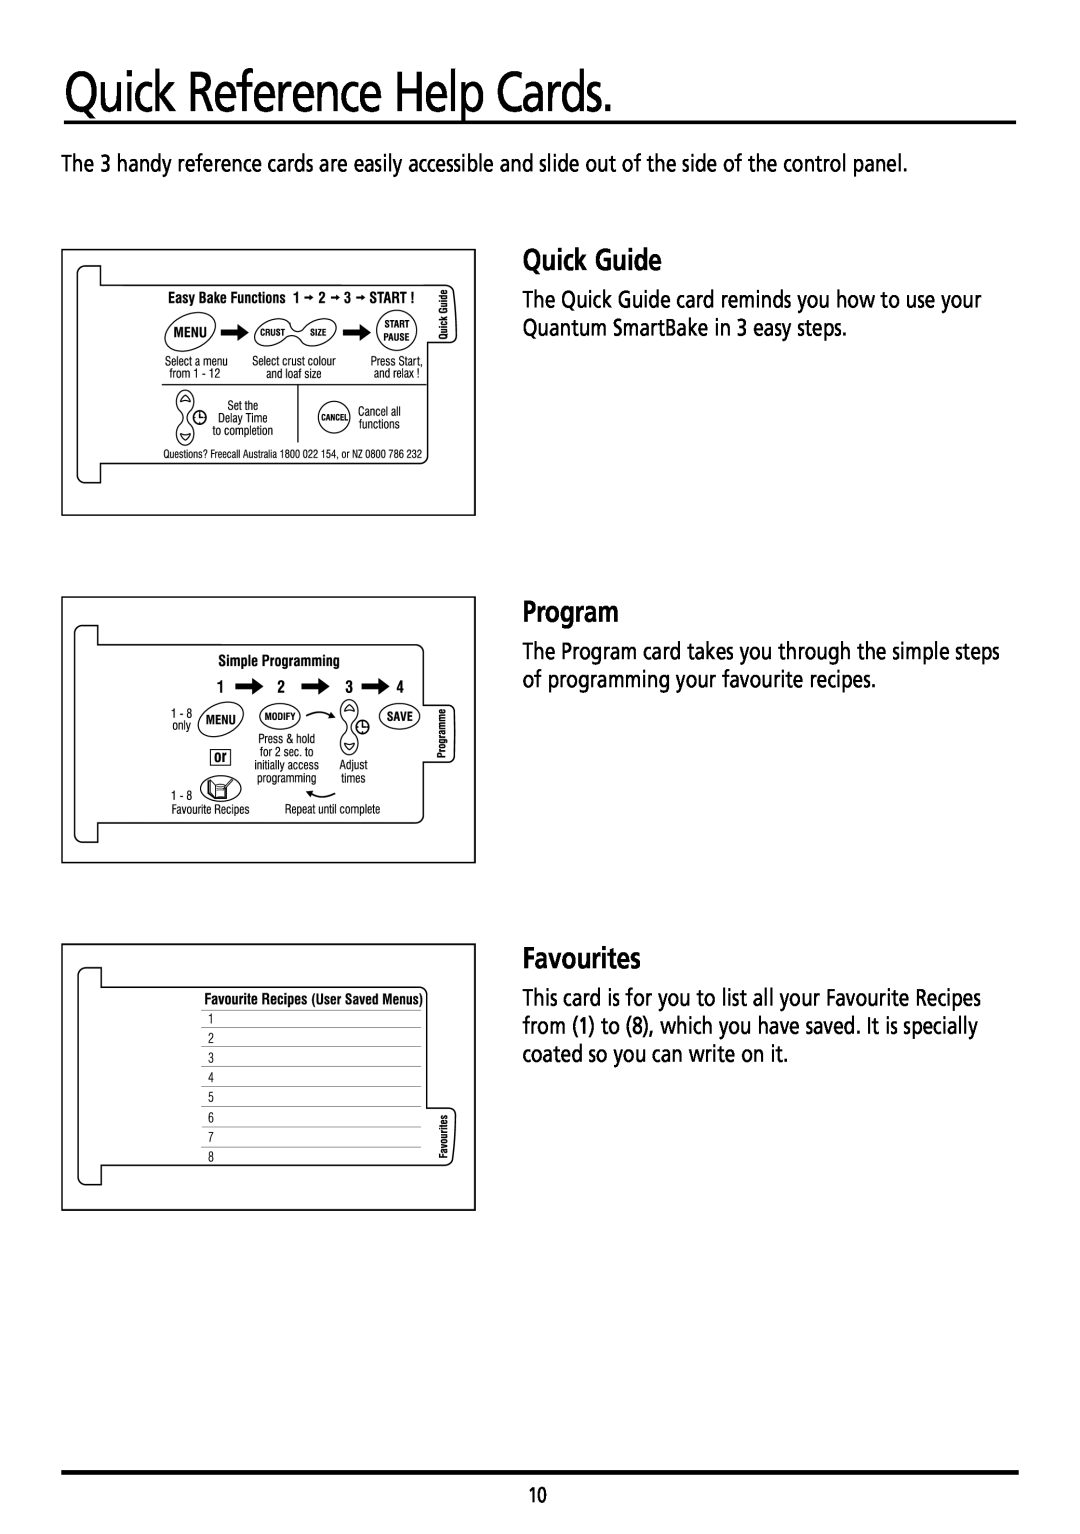 Sunbeam BM7800 manual Quick Reference Help Cards, Quick Guide, Program, Favourites 